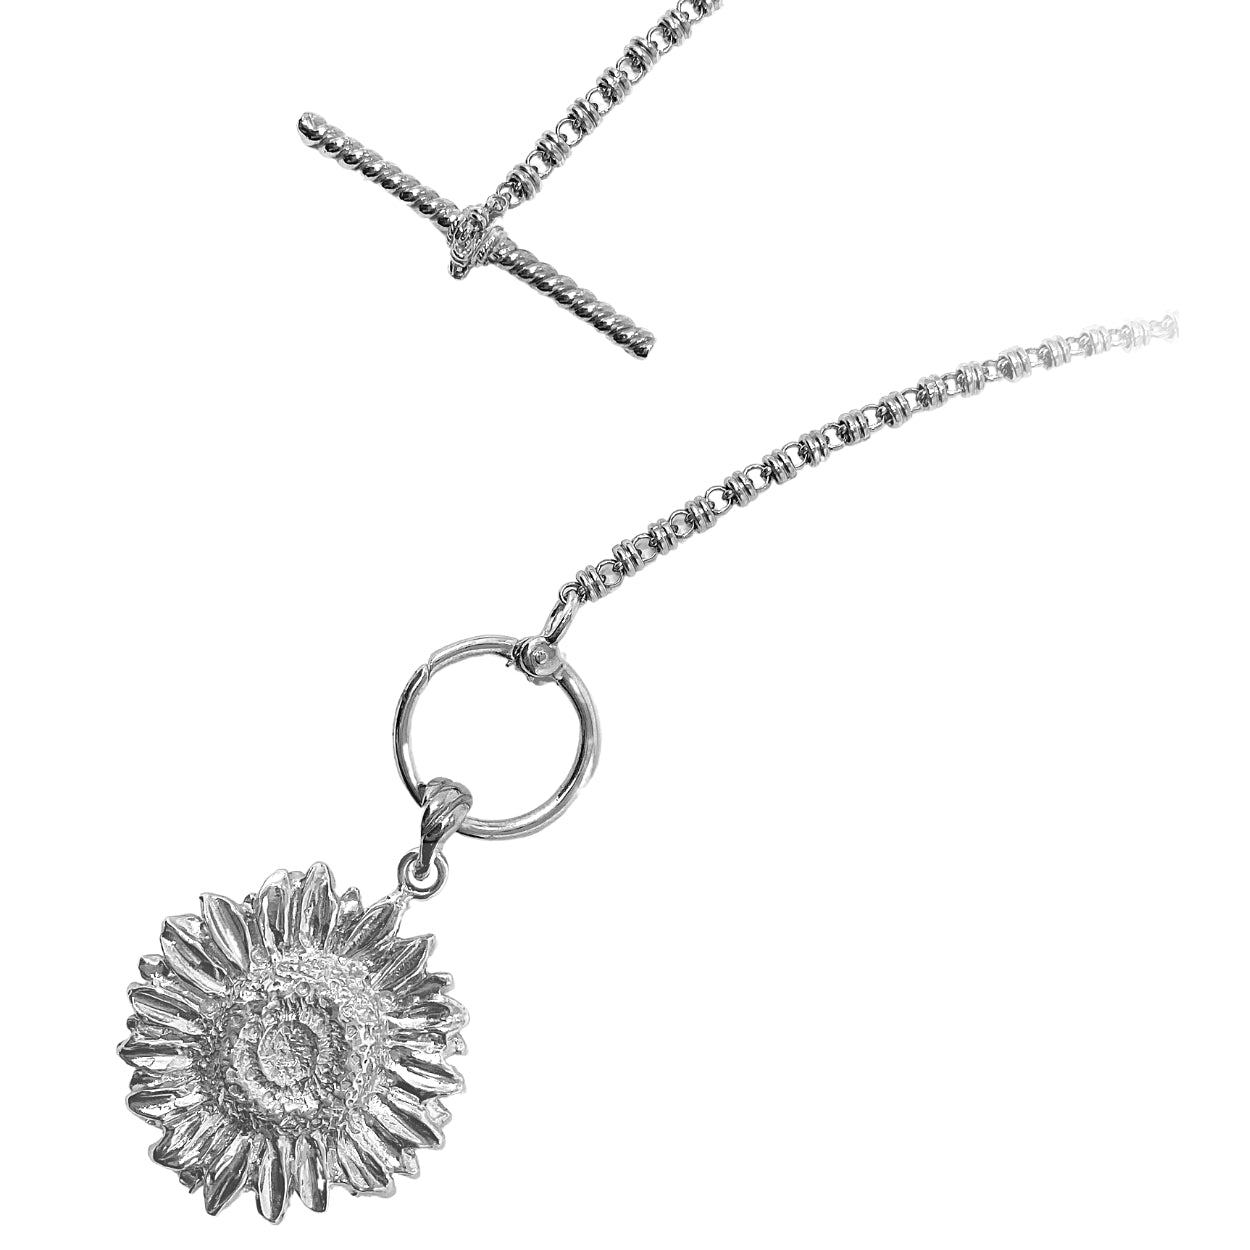 A closeup of the silver toggle clasp with an attached silver sunflower pendant detached from a silver necklace - the silver chain is from the Links 3mm collection from DelBrenna Italian Jewelry designers and artisans. Hand-crafted in Tuscany.